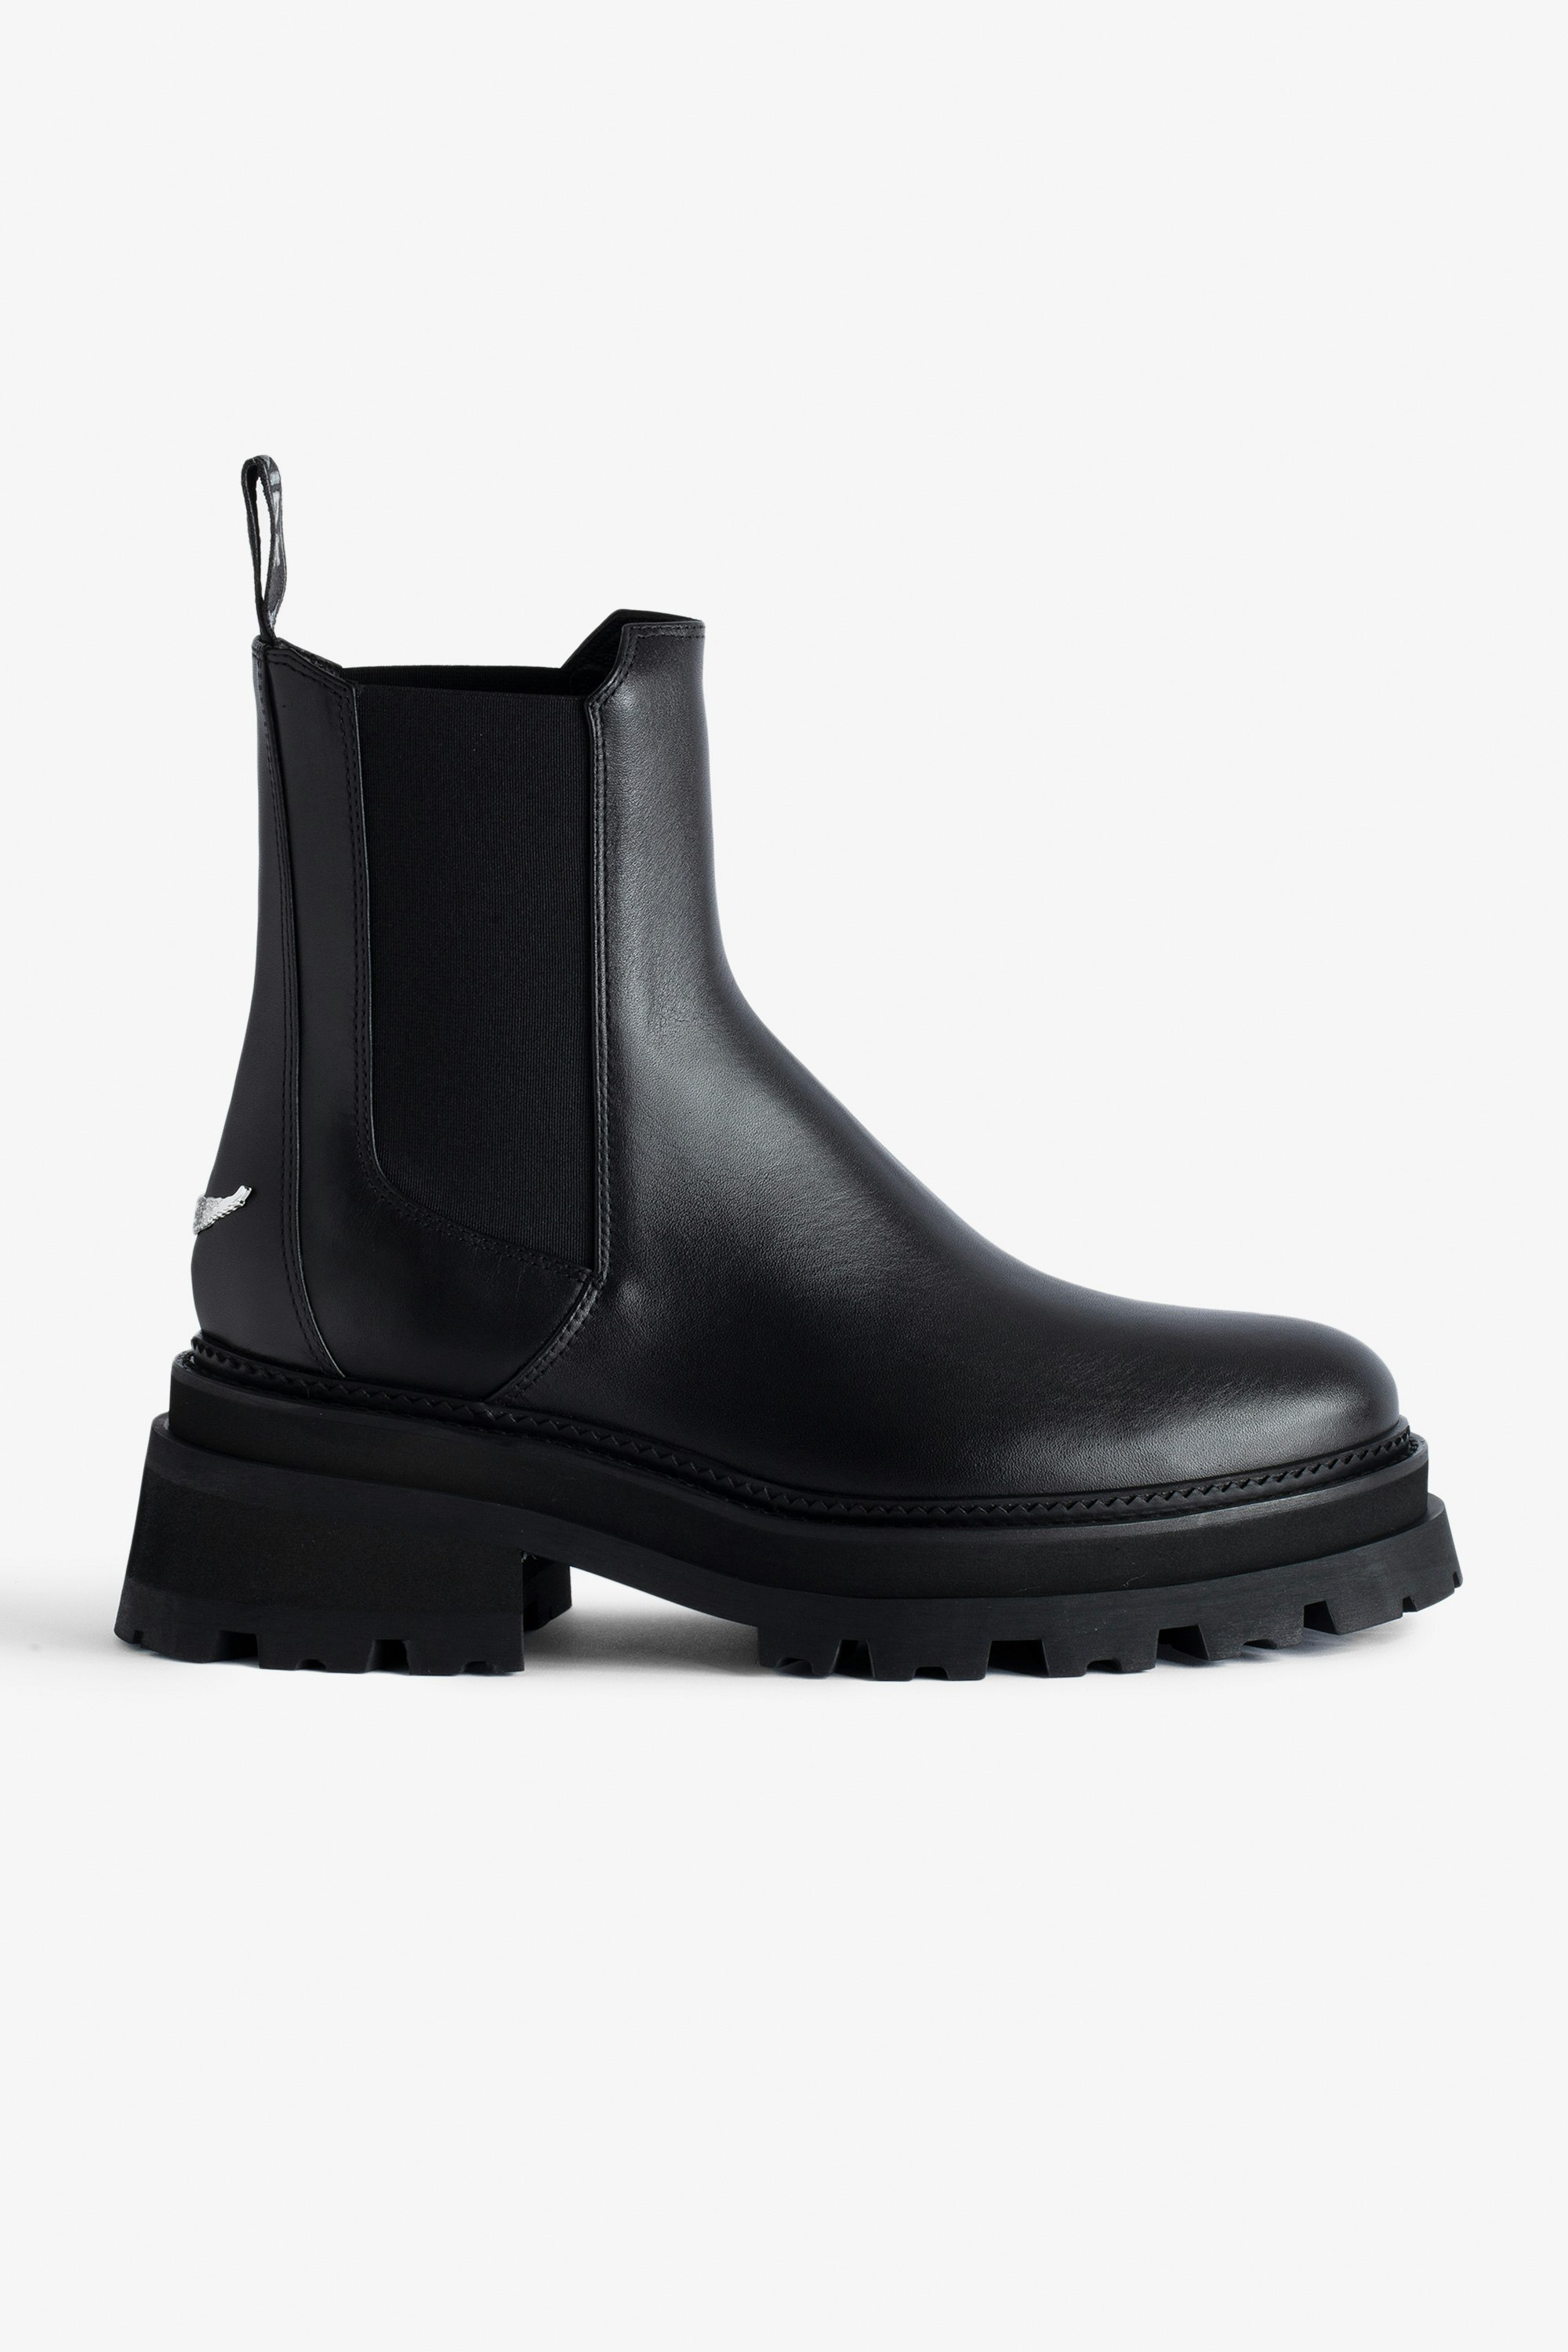 Ride Chelsea Boots - Women’s black semi-patent smooth leather Chelsea boots with wings charm.